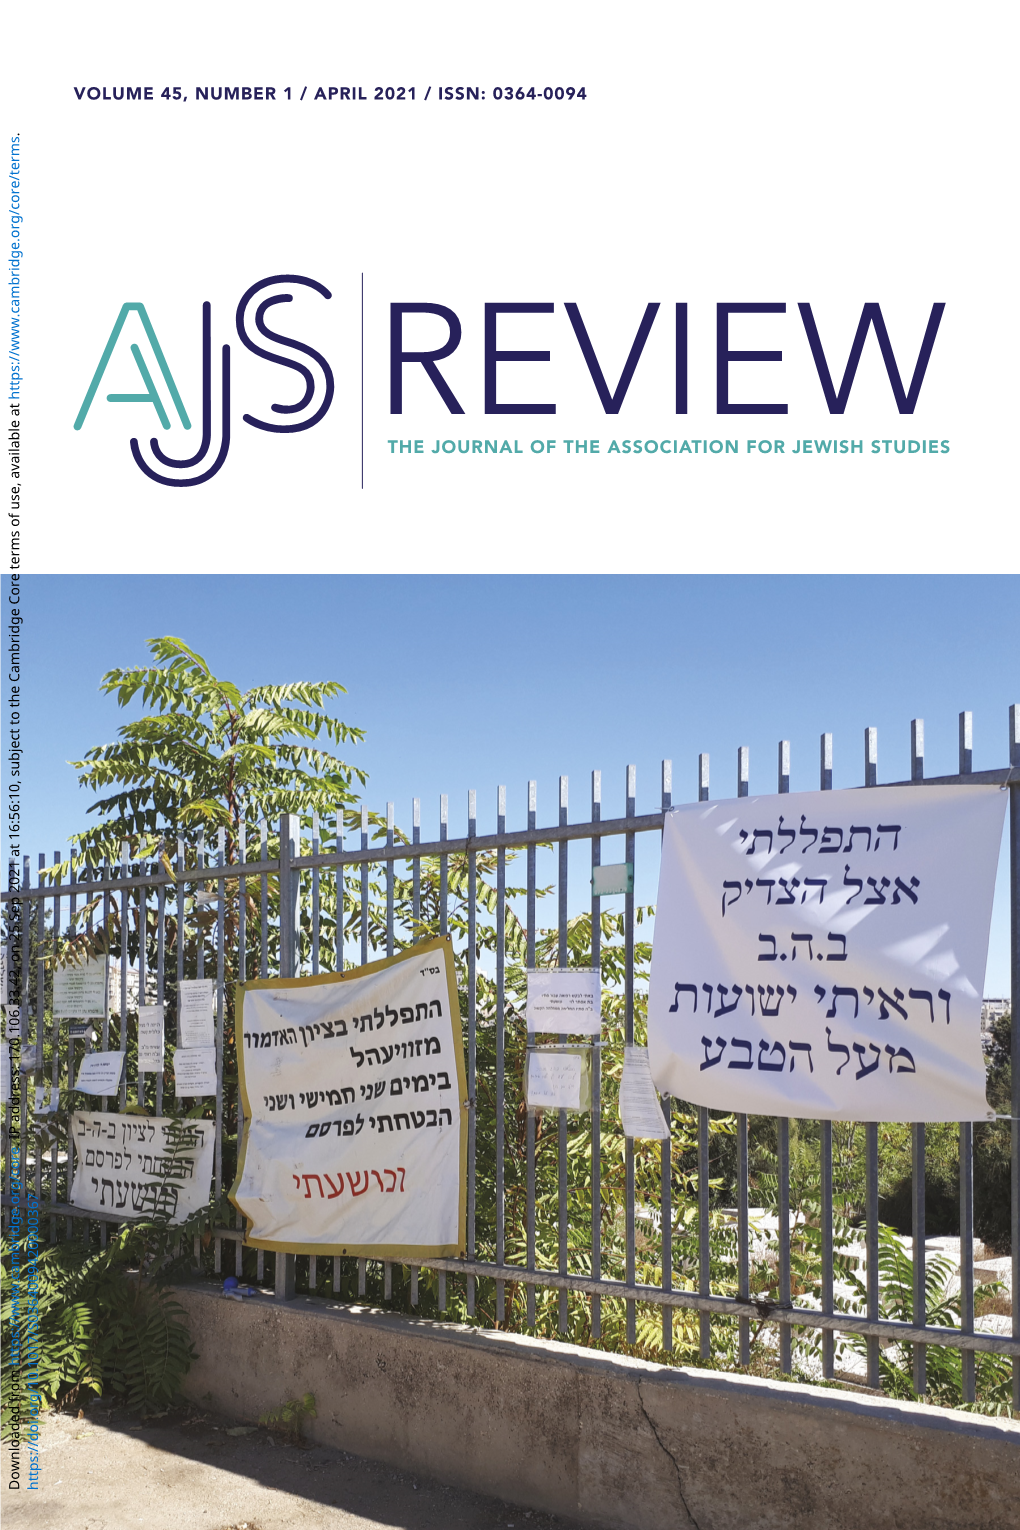 Reviewthe Journal of the Association for Jewish Studies